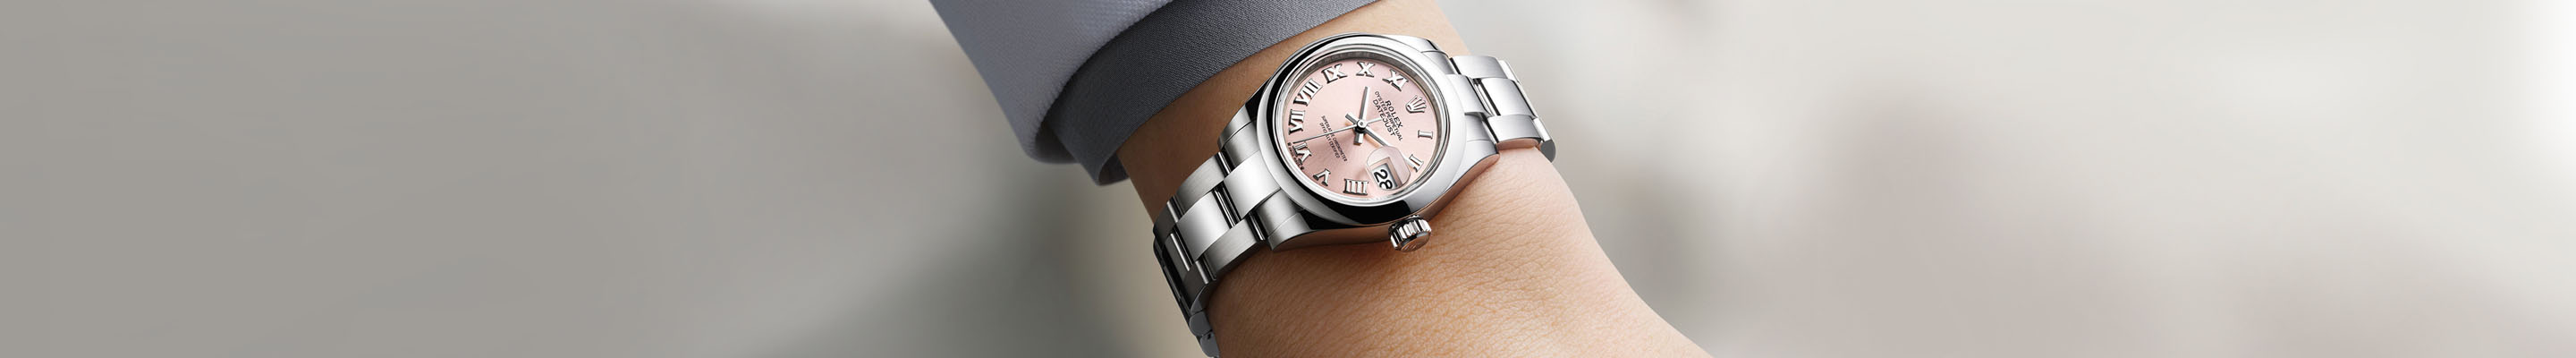 Silver Rolex Watch on a Professional Woman's Wrist